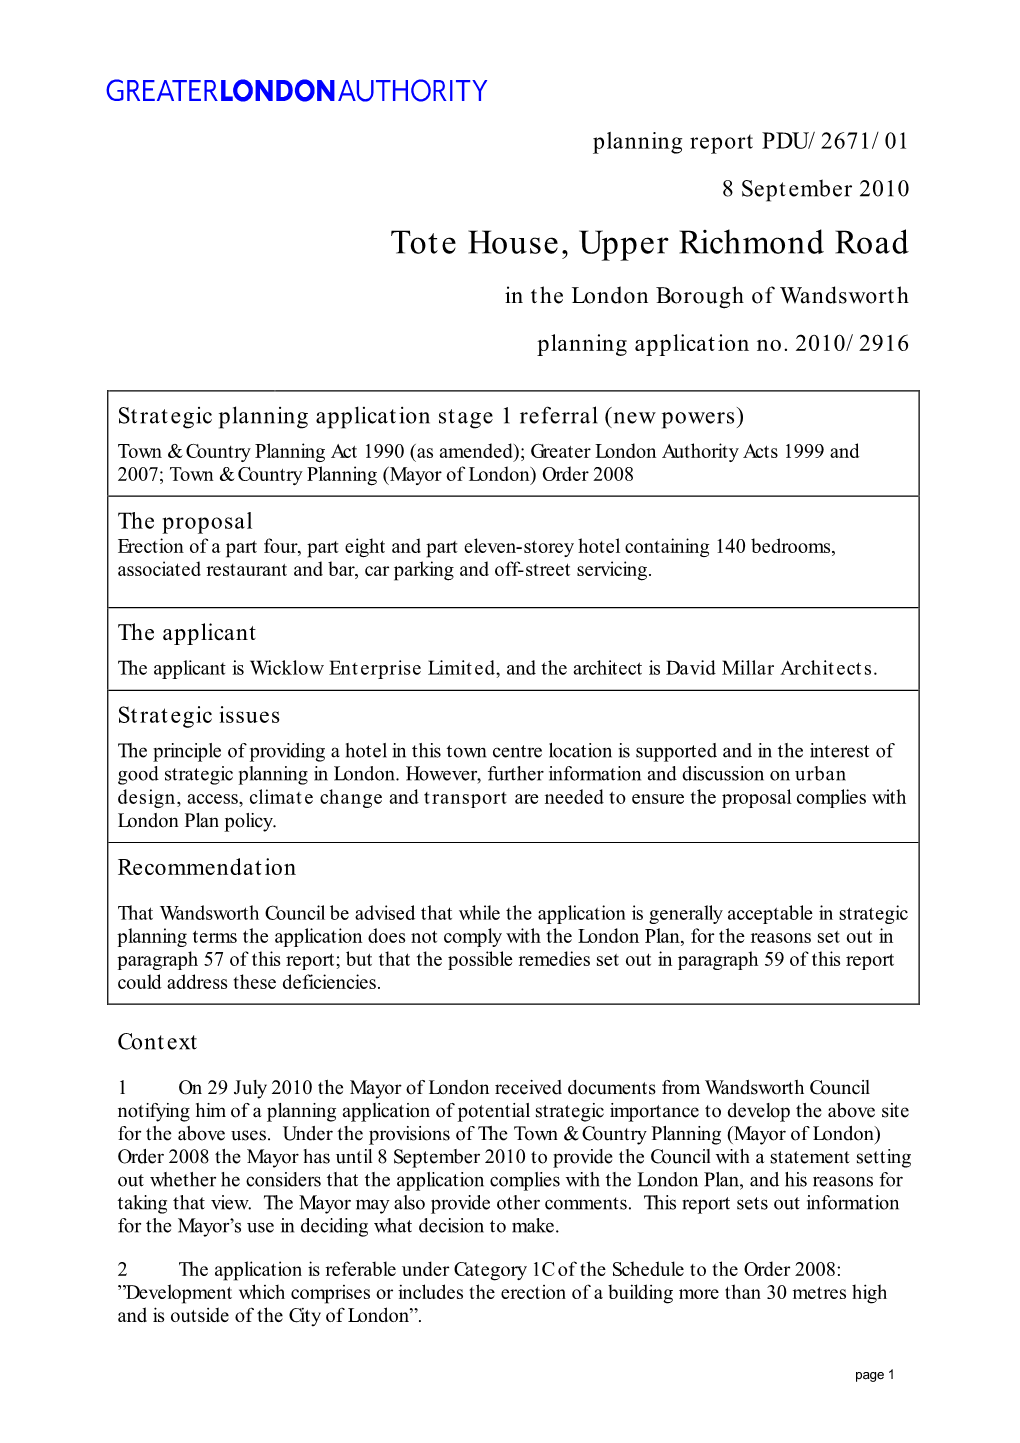 Tote House, Upper Richmond Road in the London Borough of Wandsworth Planning Application No